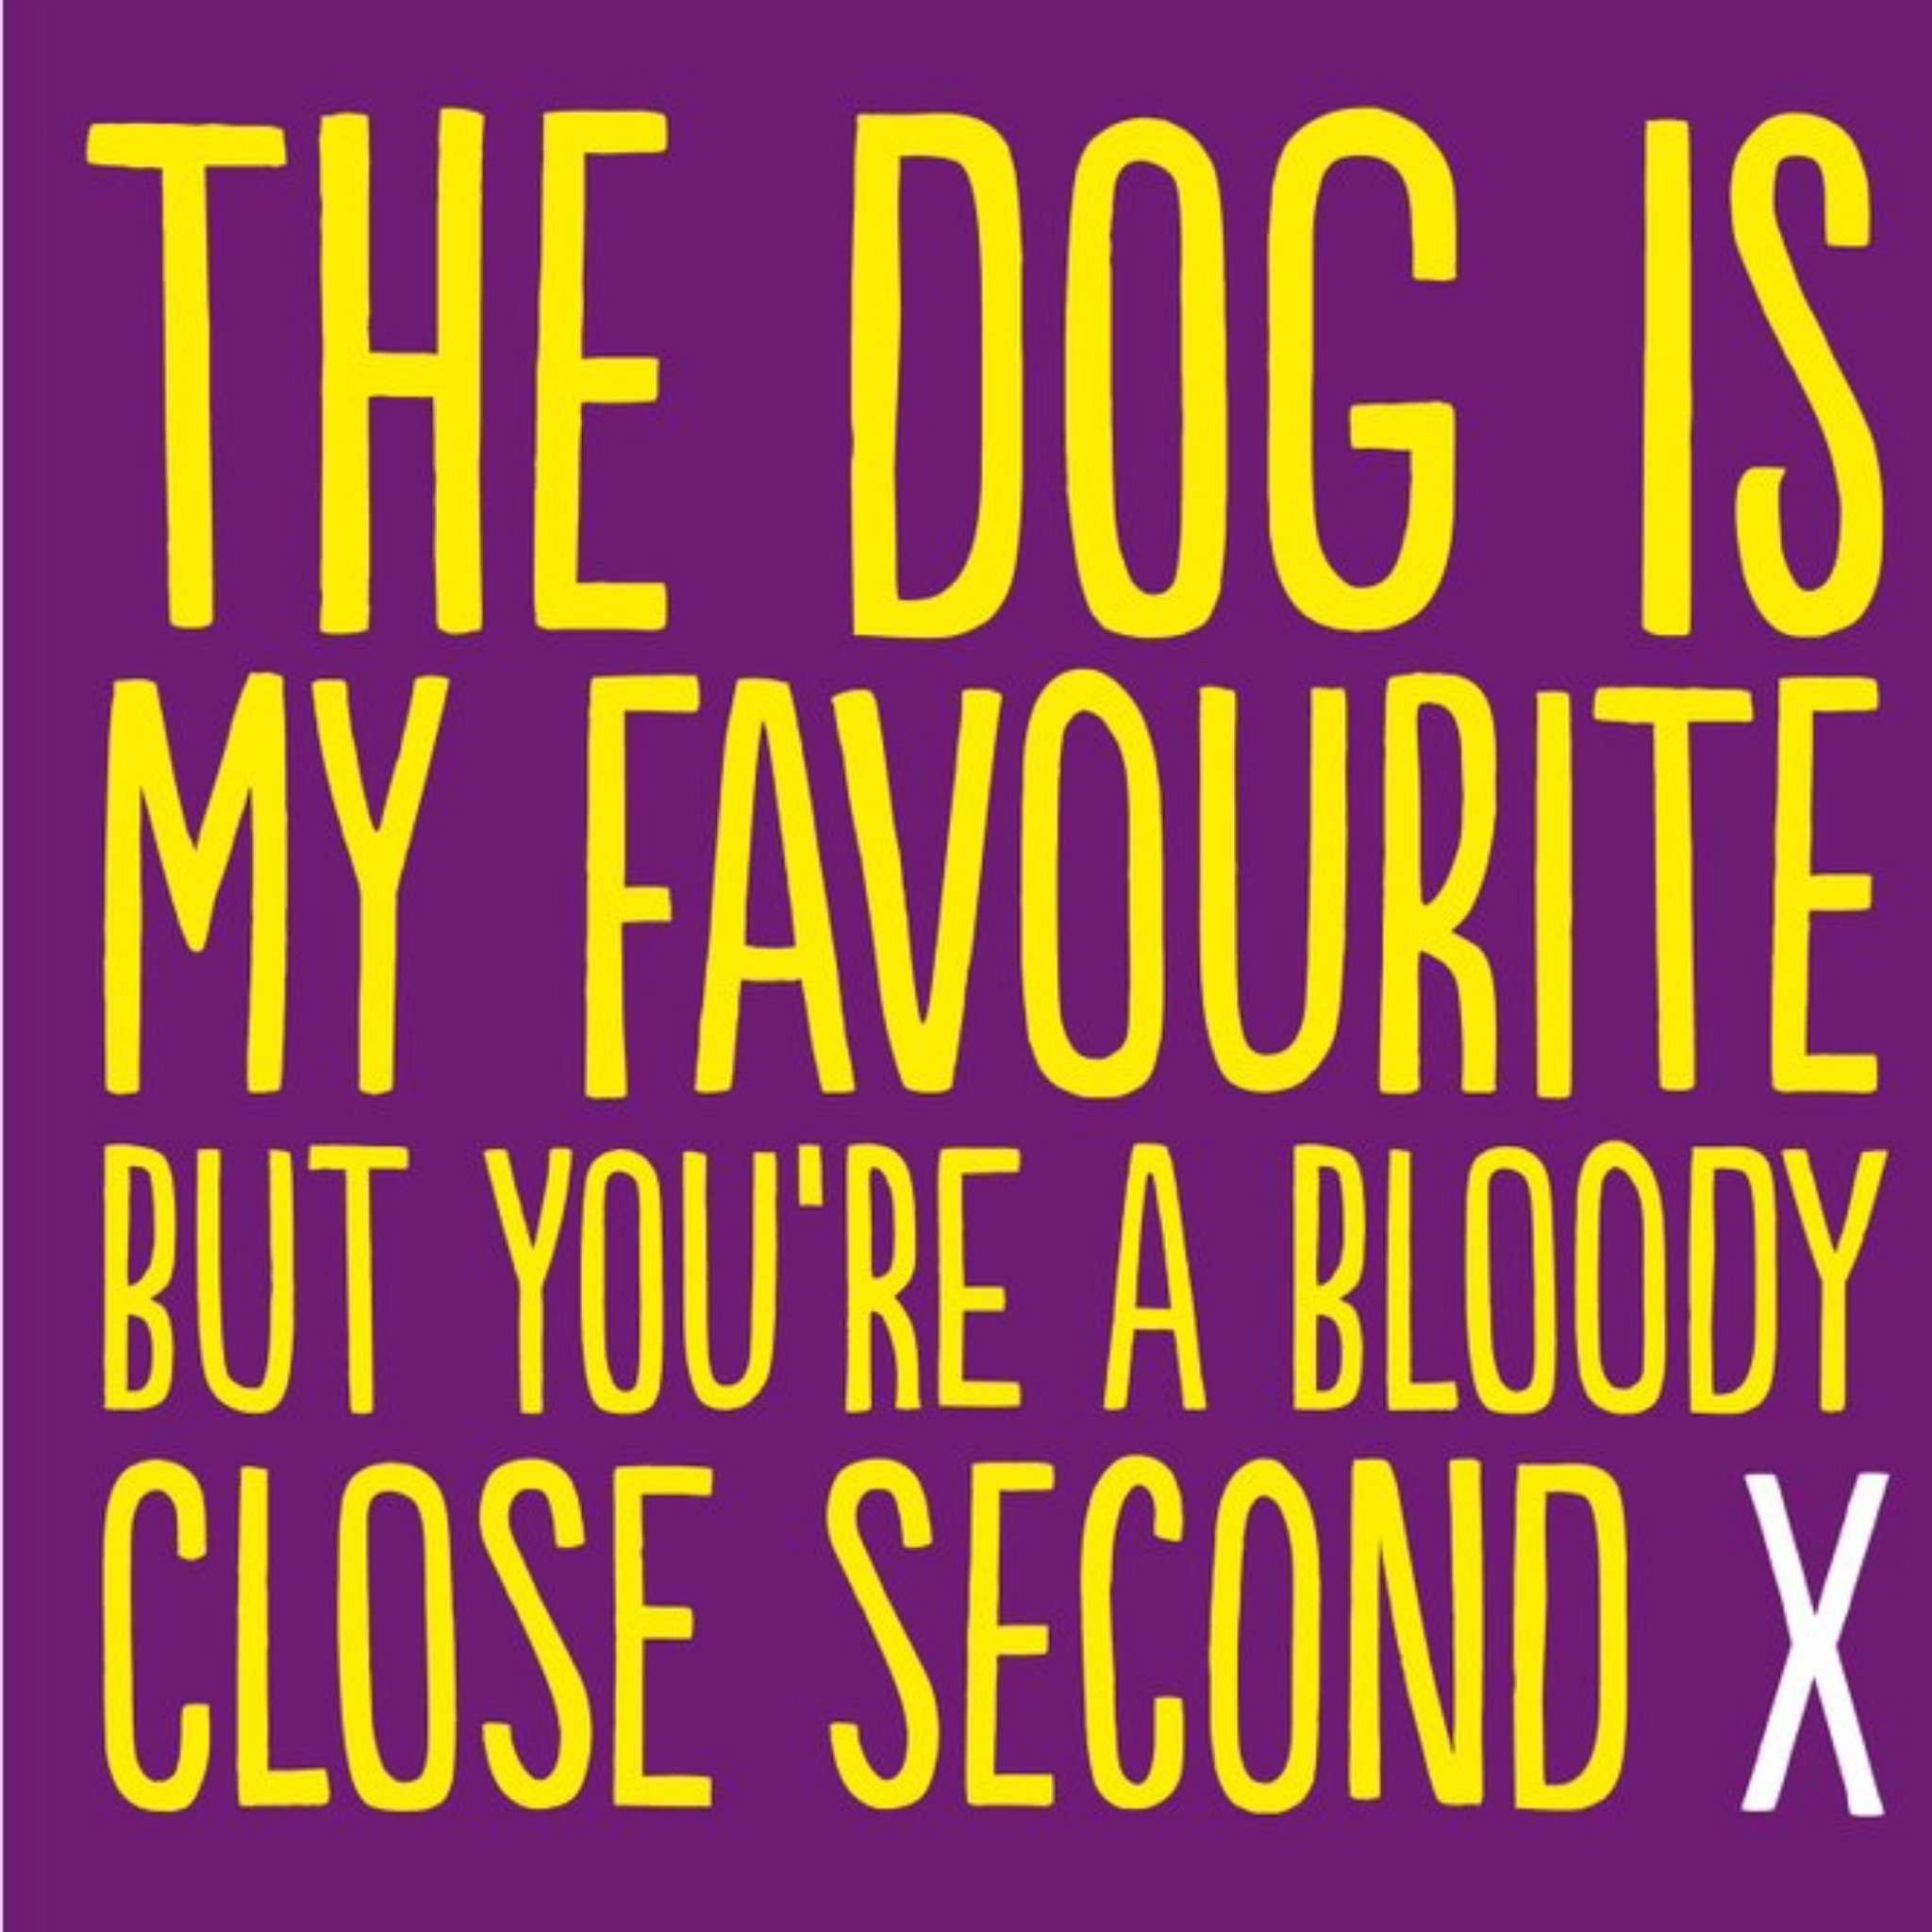 Moonpig Funny The Dog Is My Favourite But You Are A Bloody Close Second Card, Square